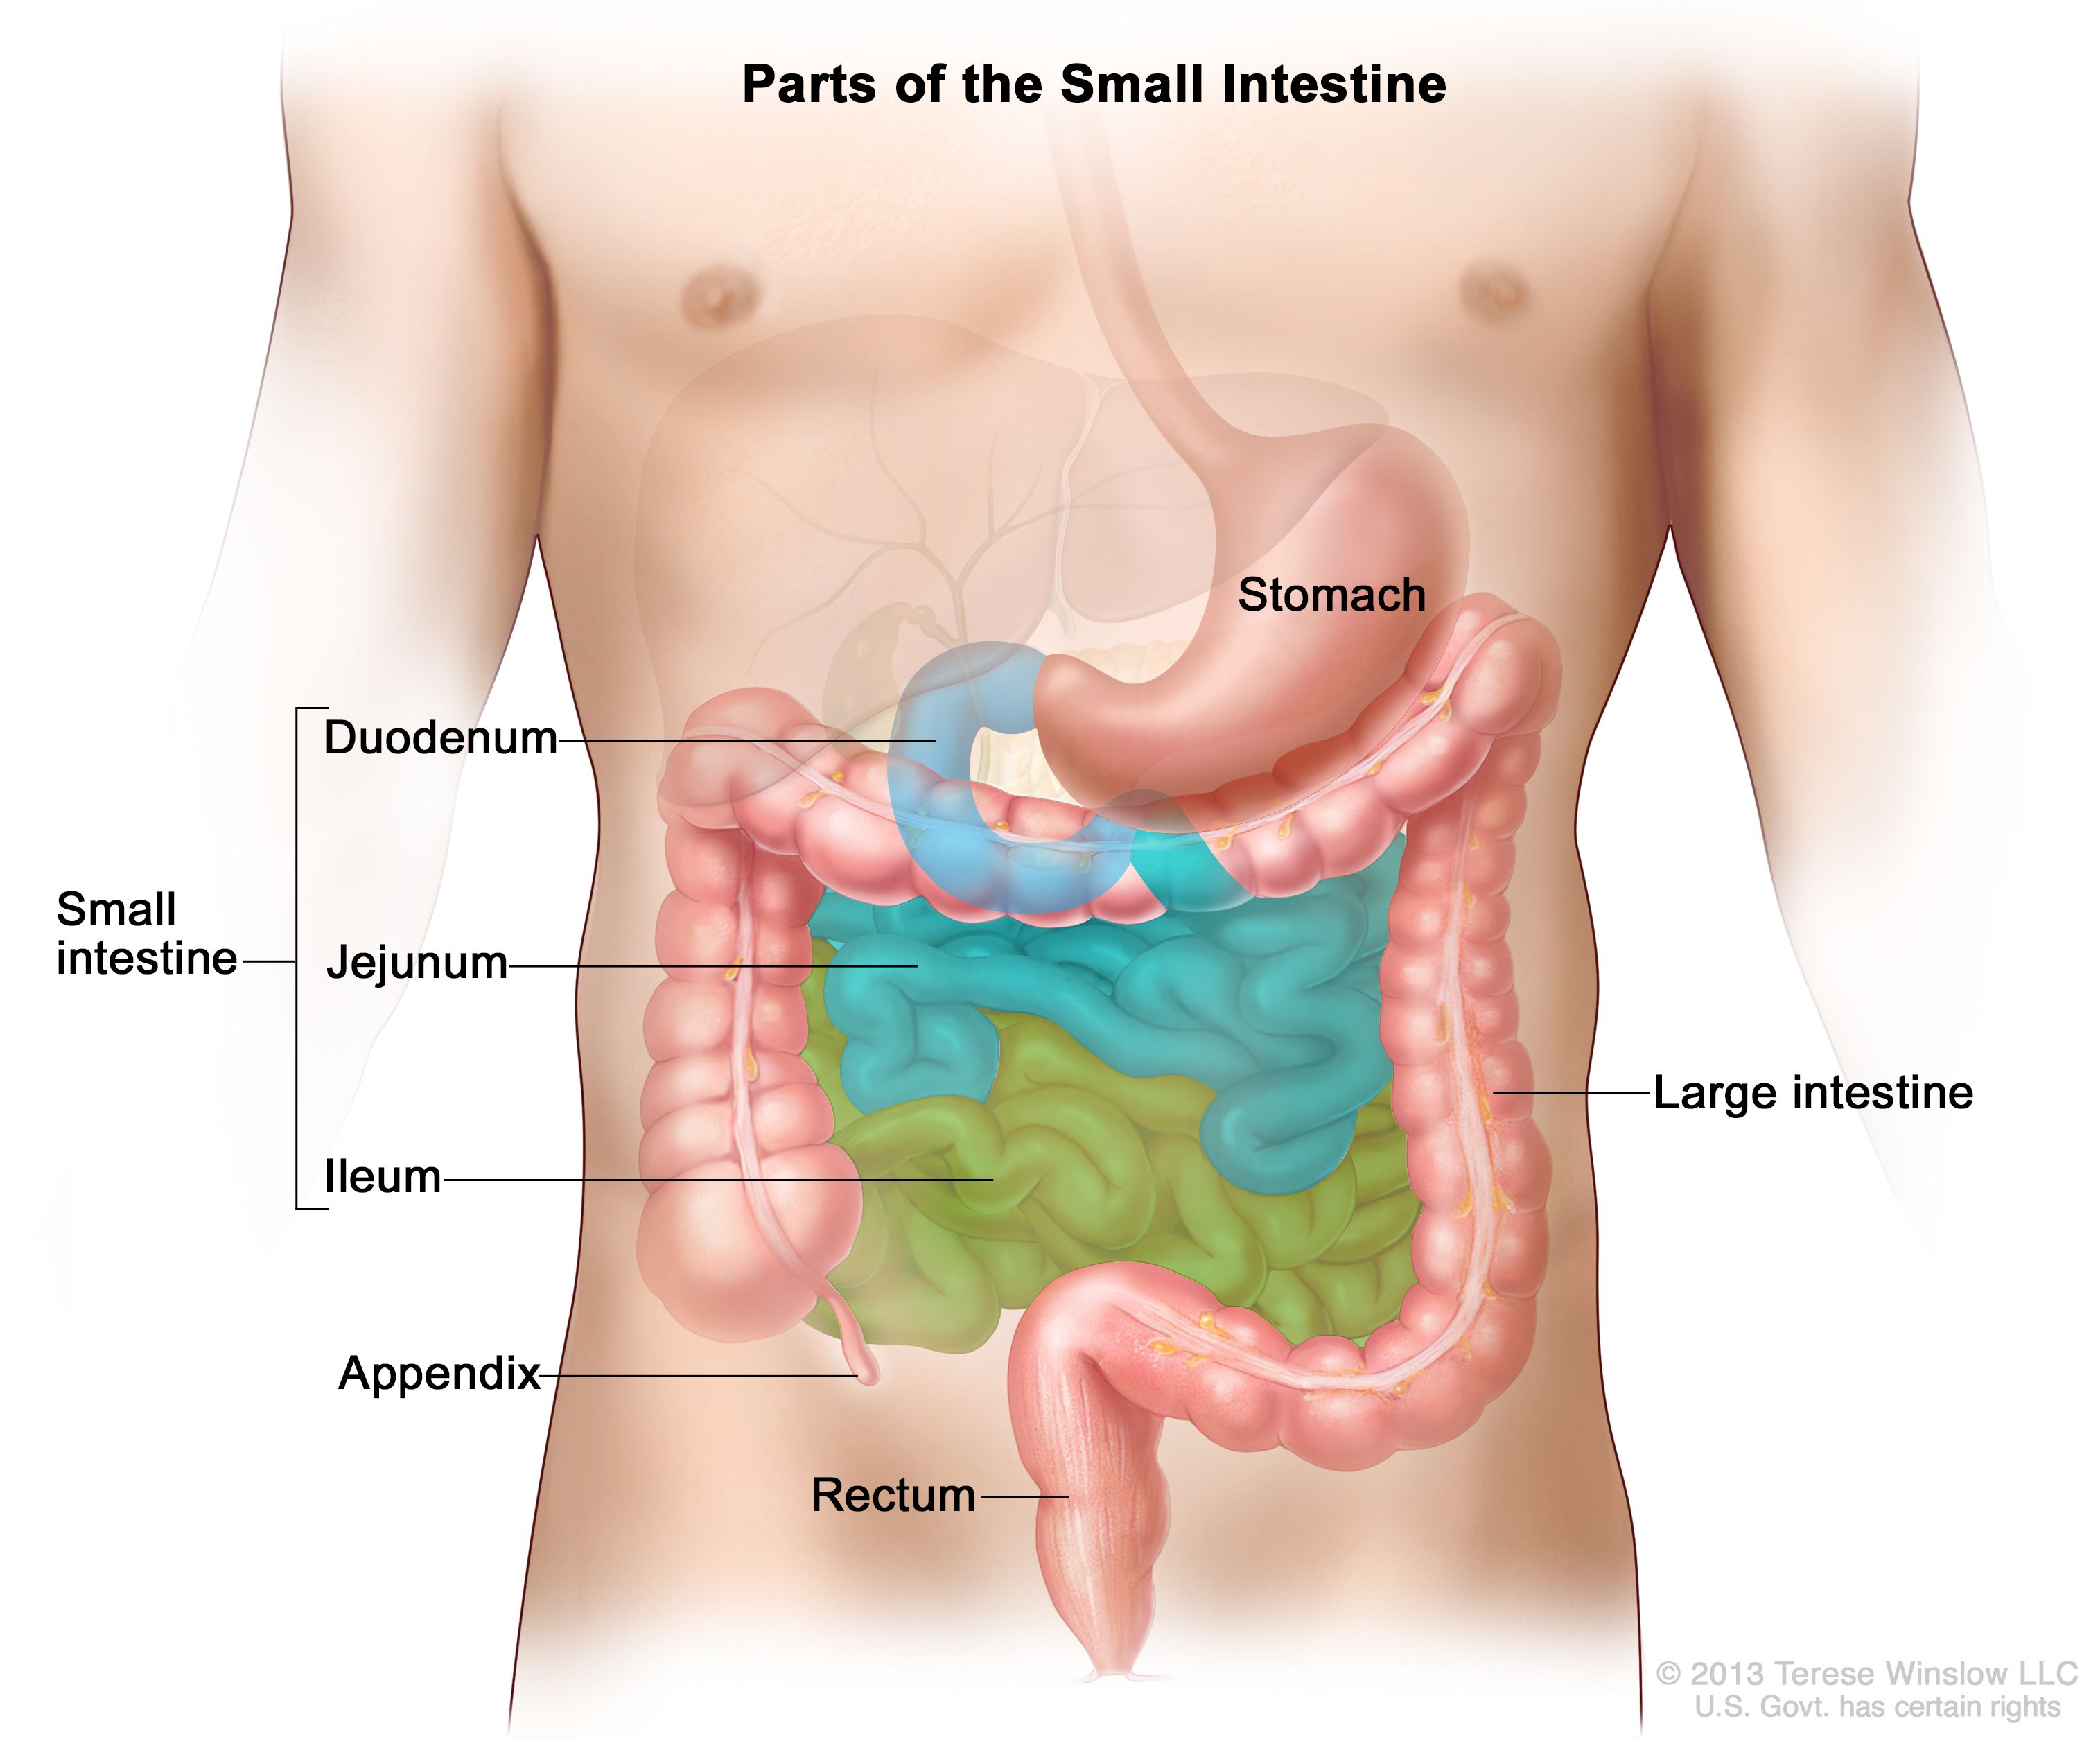 Definition of small intestine - NCI Dictionary of Cancer Terms - National Cancer Institute